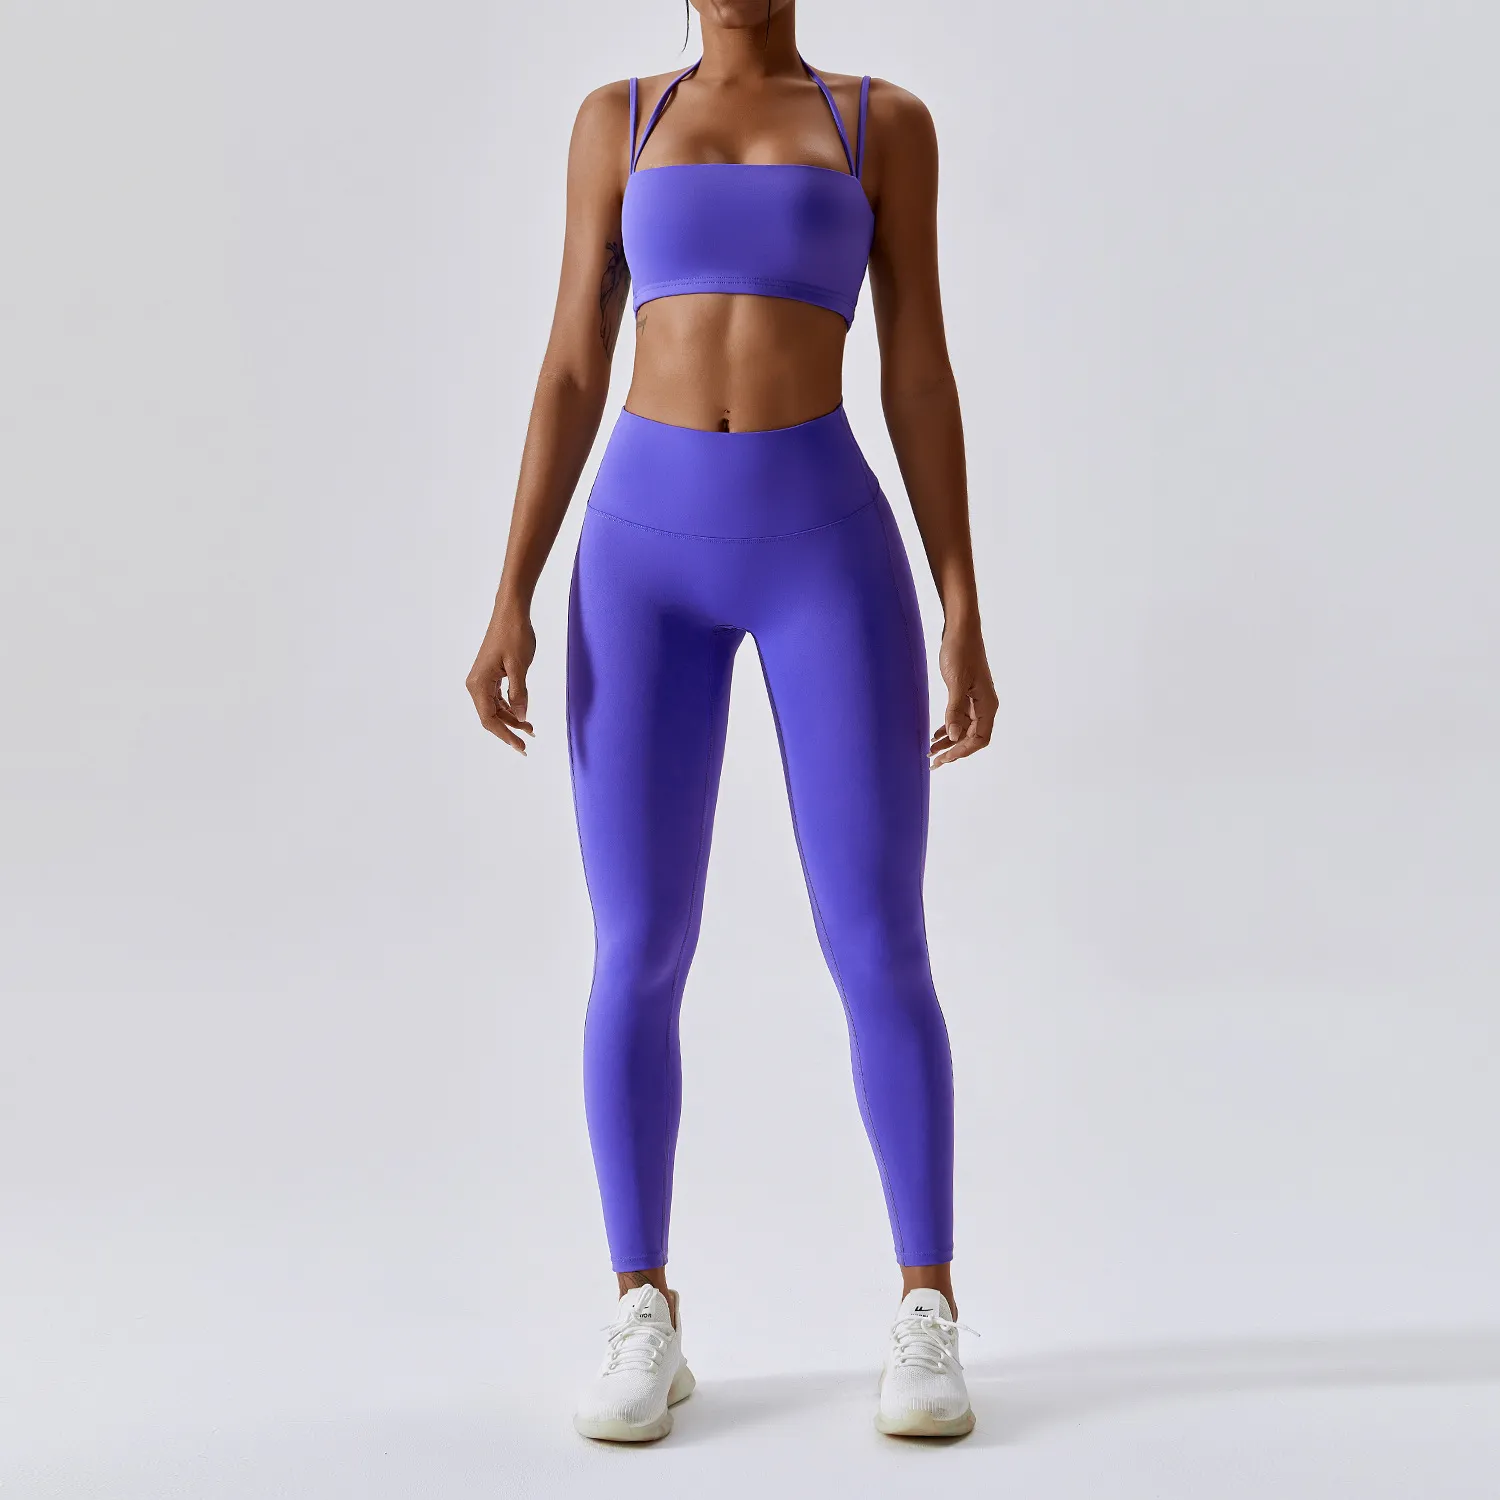 Yoga Clothing Sets Athletic Wear Women High Waist Leggings And Top Two  Piece Set Seamless Gym Tracksuit Fitness Workout Outfits : Gearbest